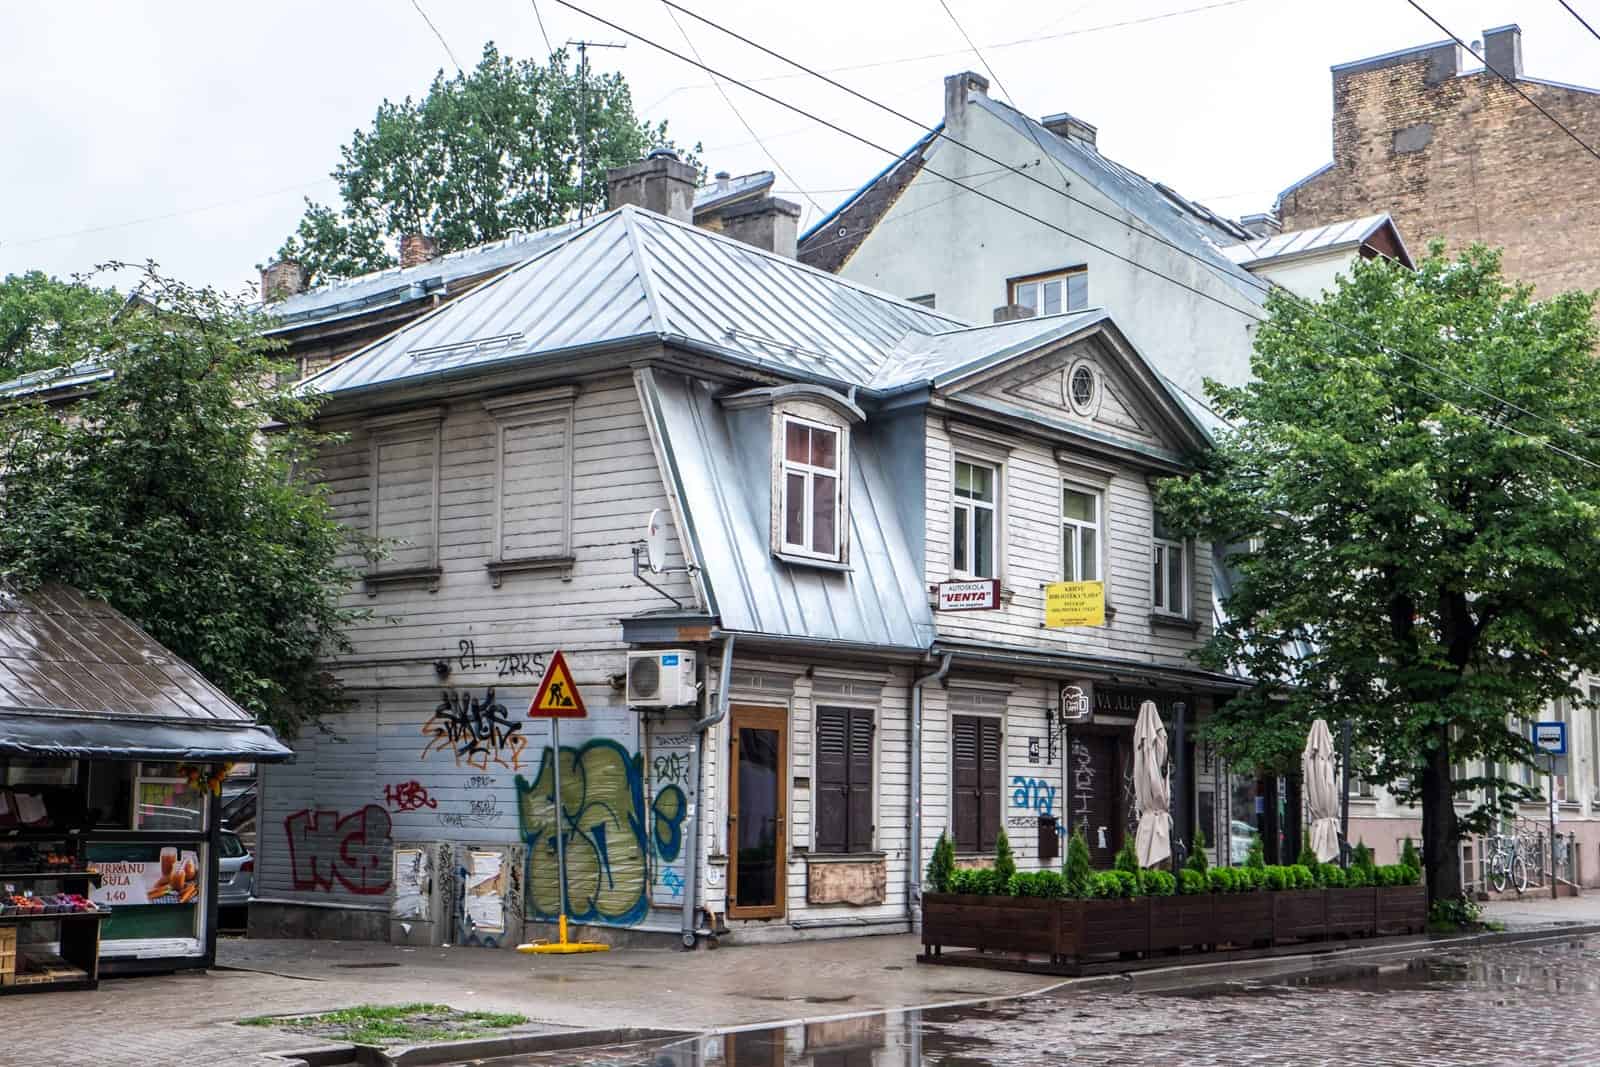 A typical old wooden house in Riga transformed into an arts and events space